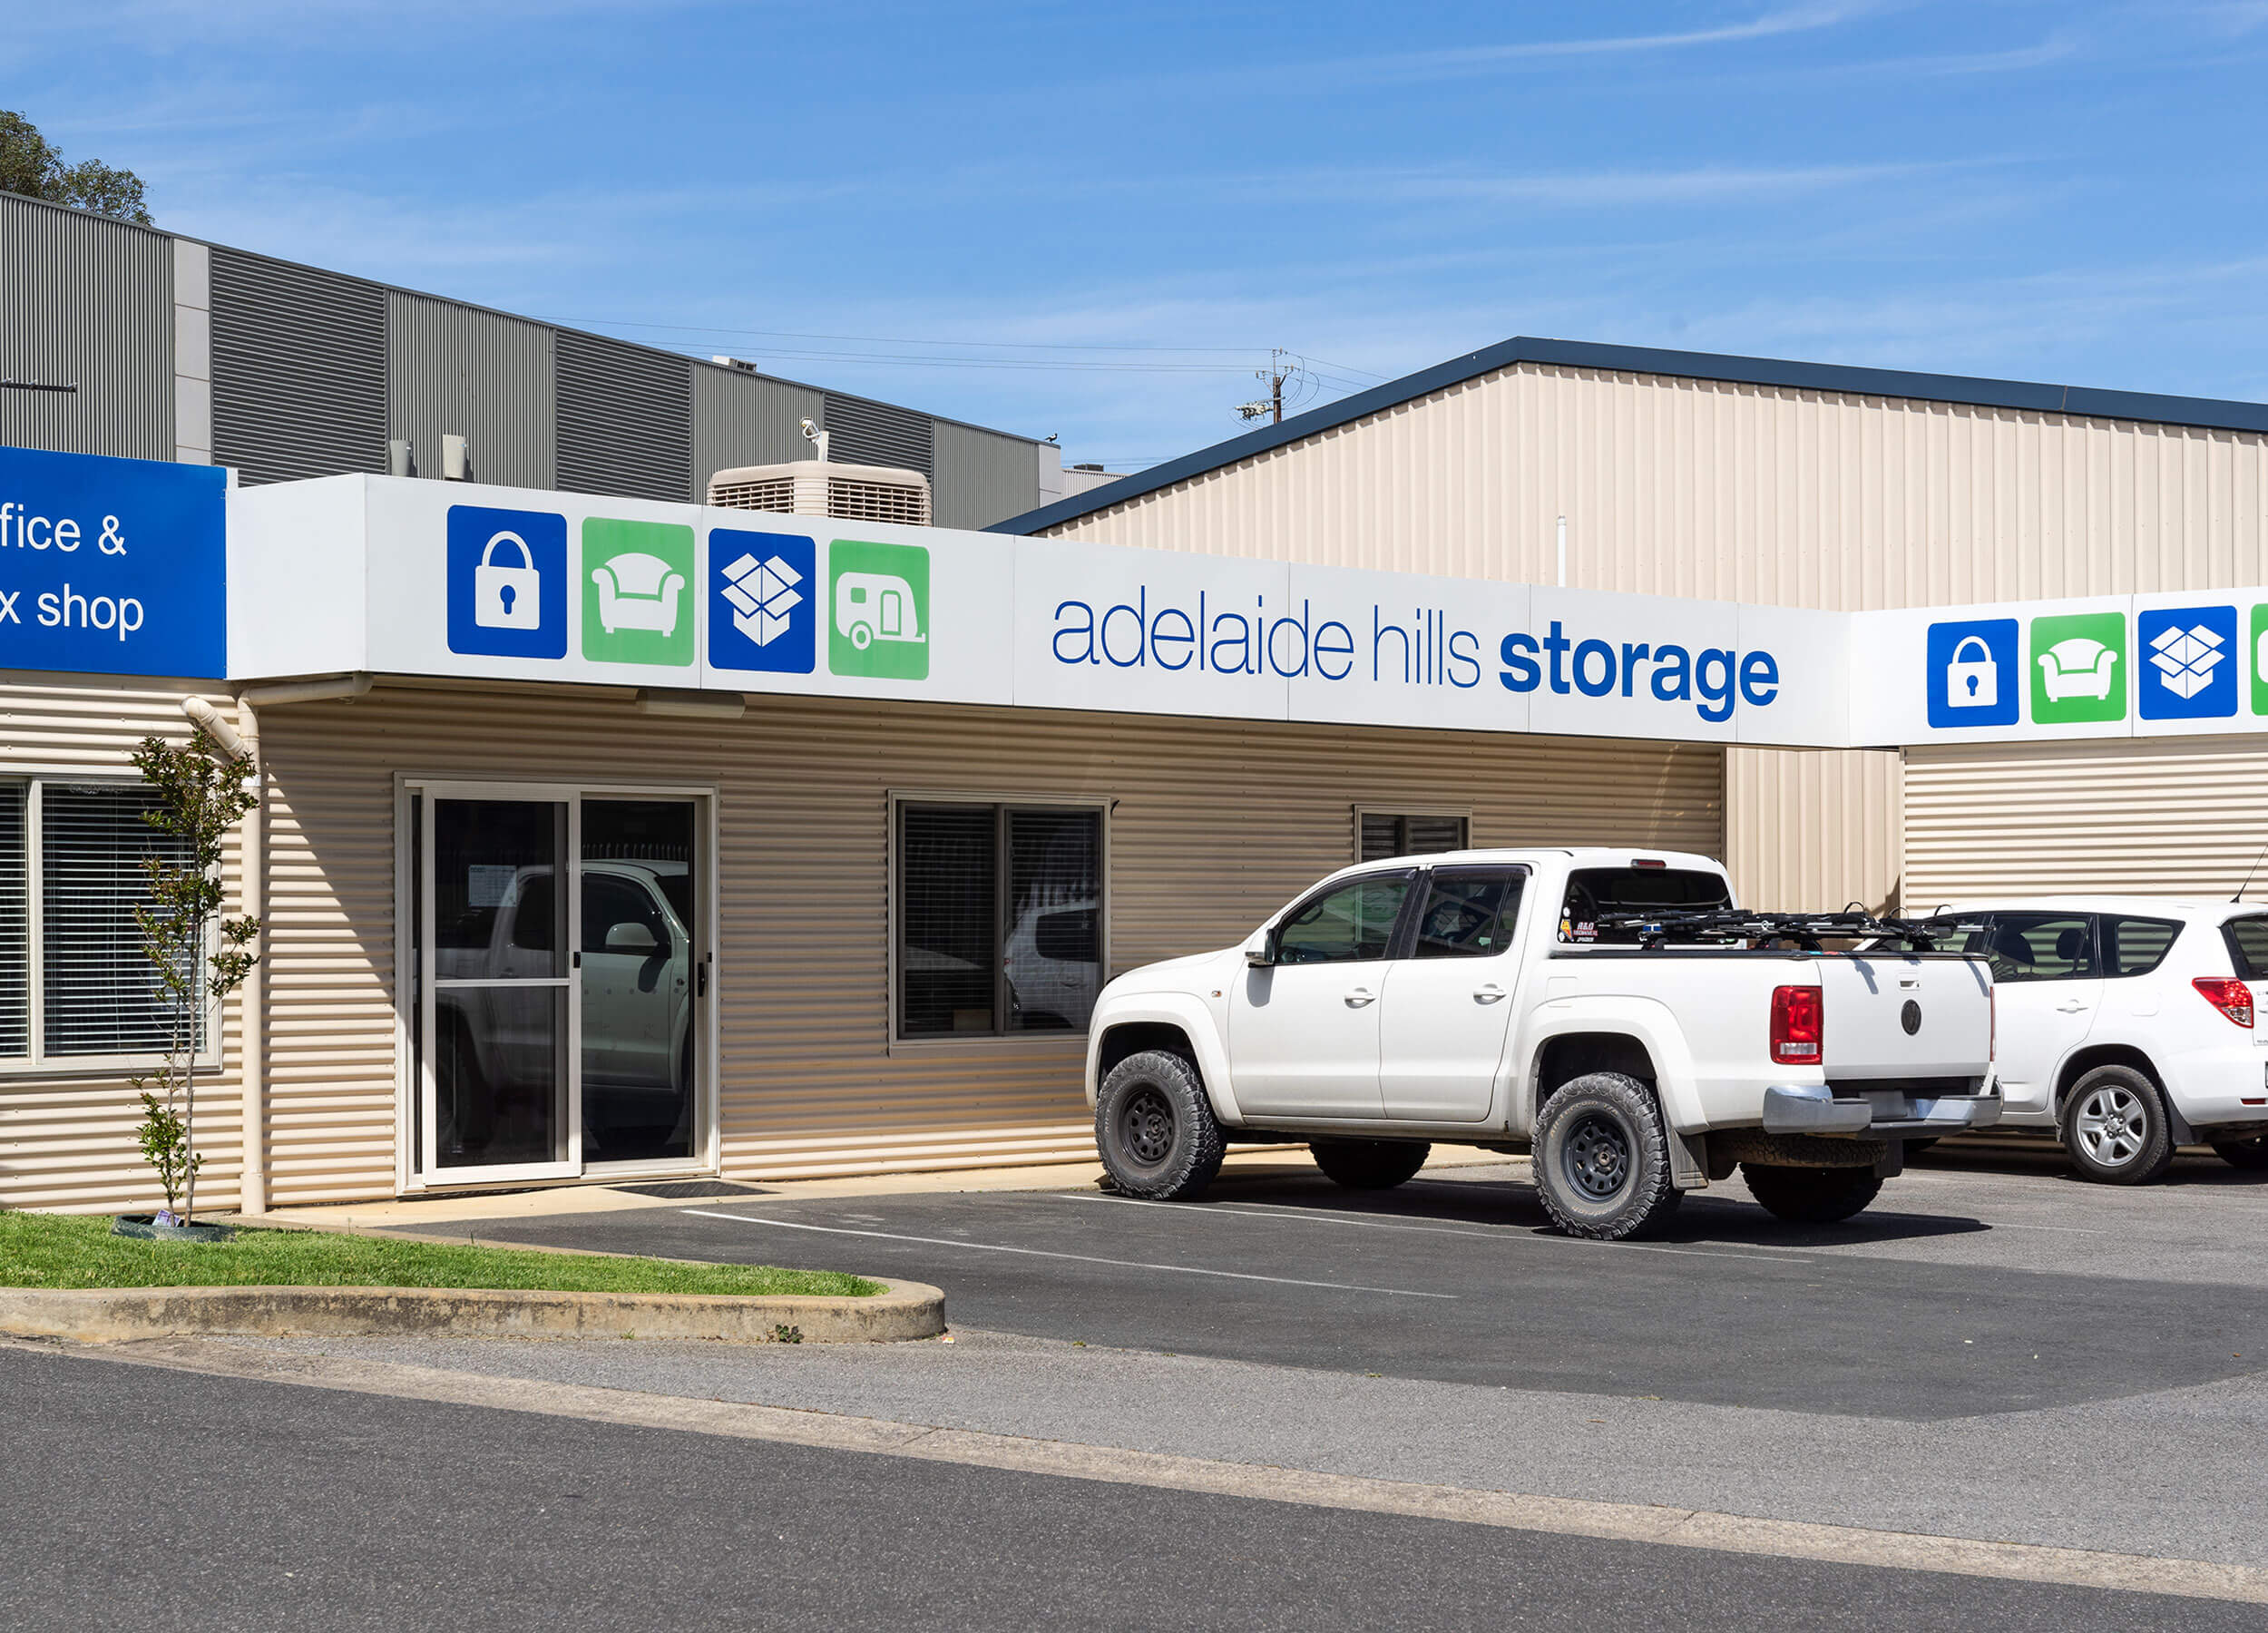 Adelaide Hills Storage front office and car park